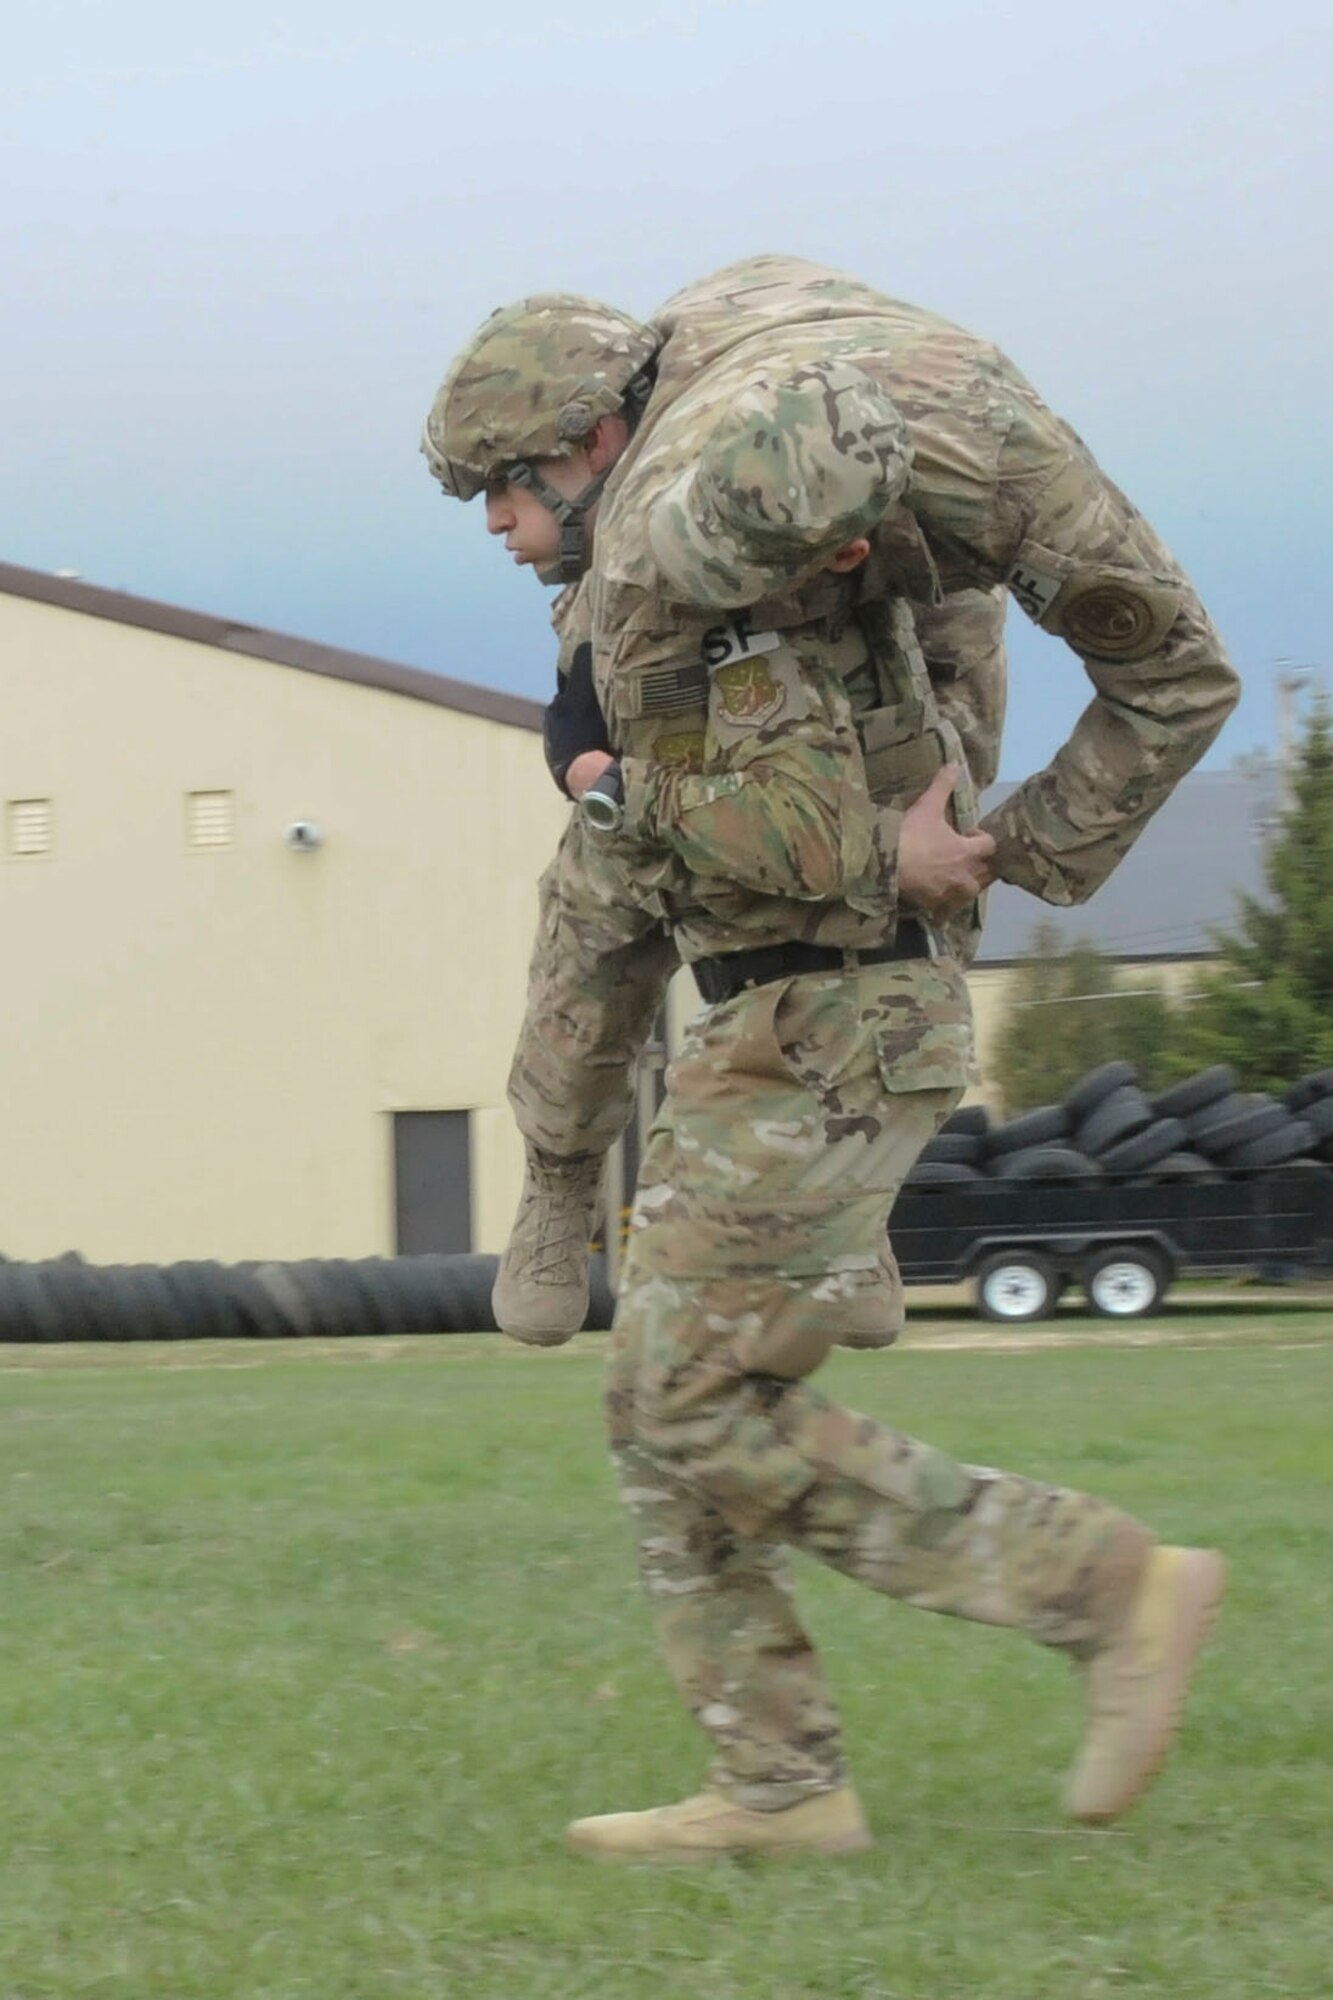 Tech. Sgt. Kyle Douglass, 91st Security Forces Group physical security NCO in charge, buddy carries a teammate during training at Minot Air Force Base, N.D., May 1, 2017. The team practiced physical fitness with buddy carries, a Humvee push and a liter carry. (U.S. Air Force photo/Airman 1st Class Jessica Weissman)